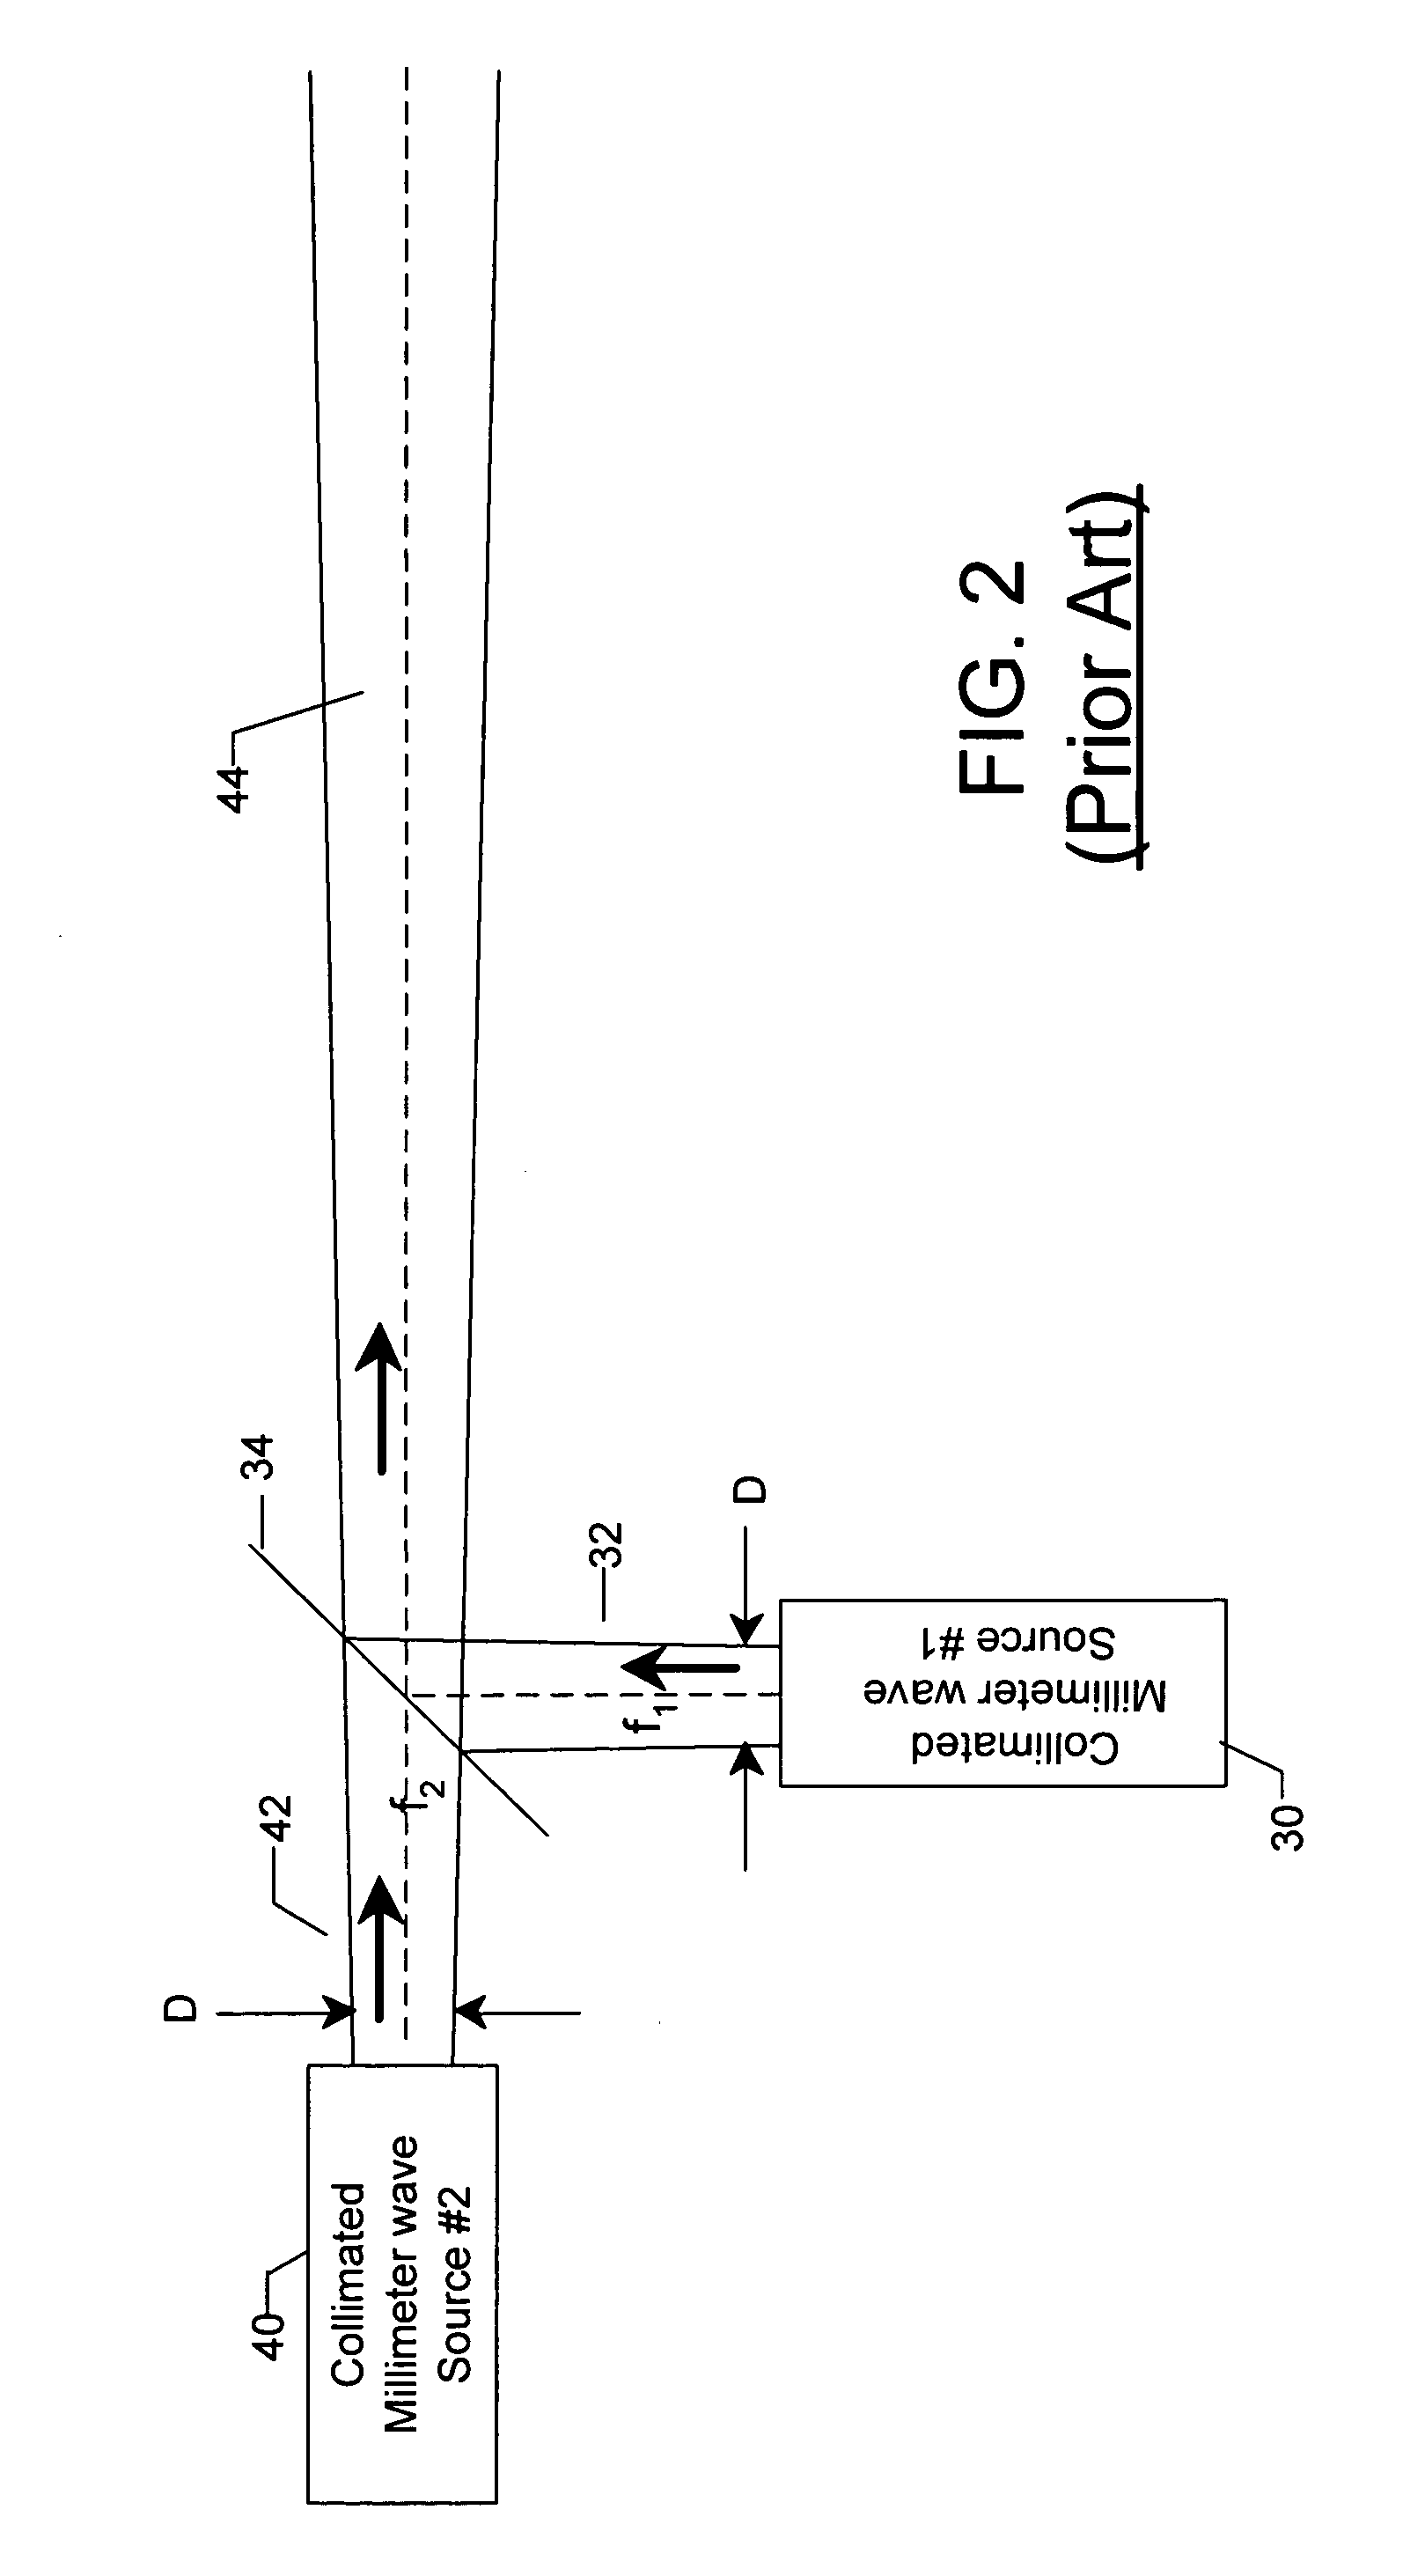 Two-dimensional dual-frequency antenna and associated down-conversion method